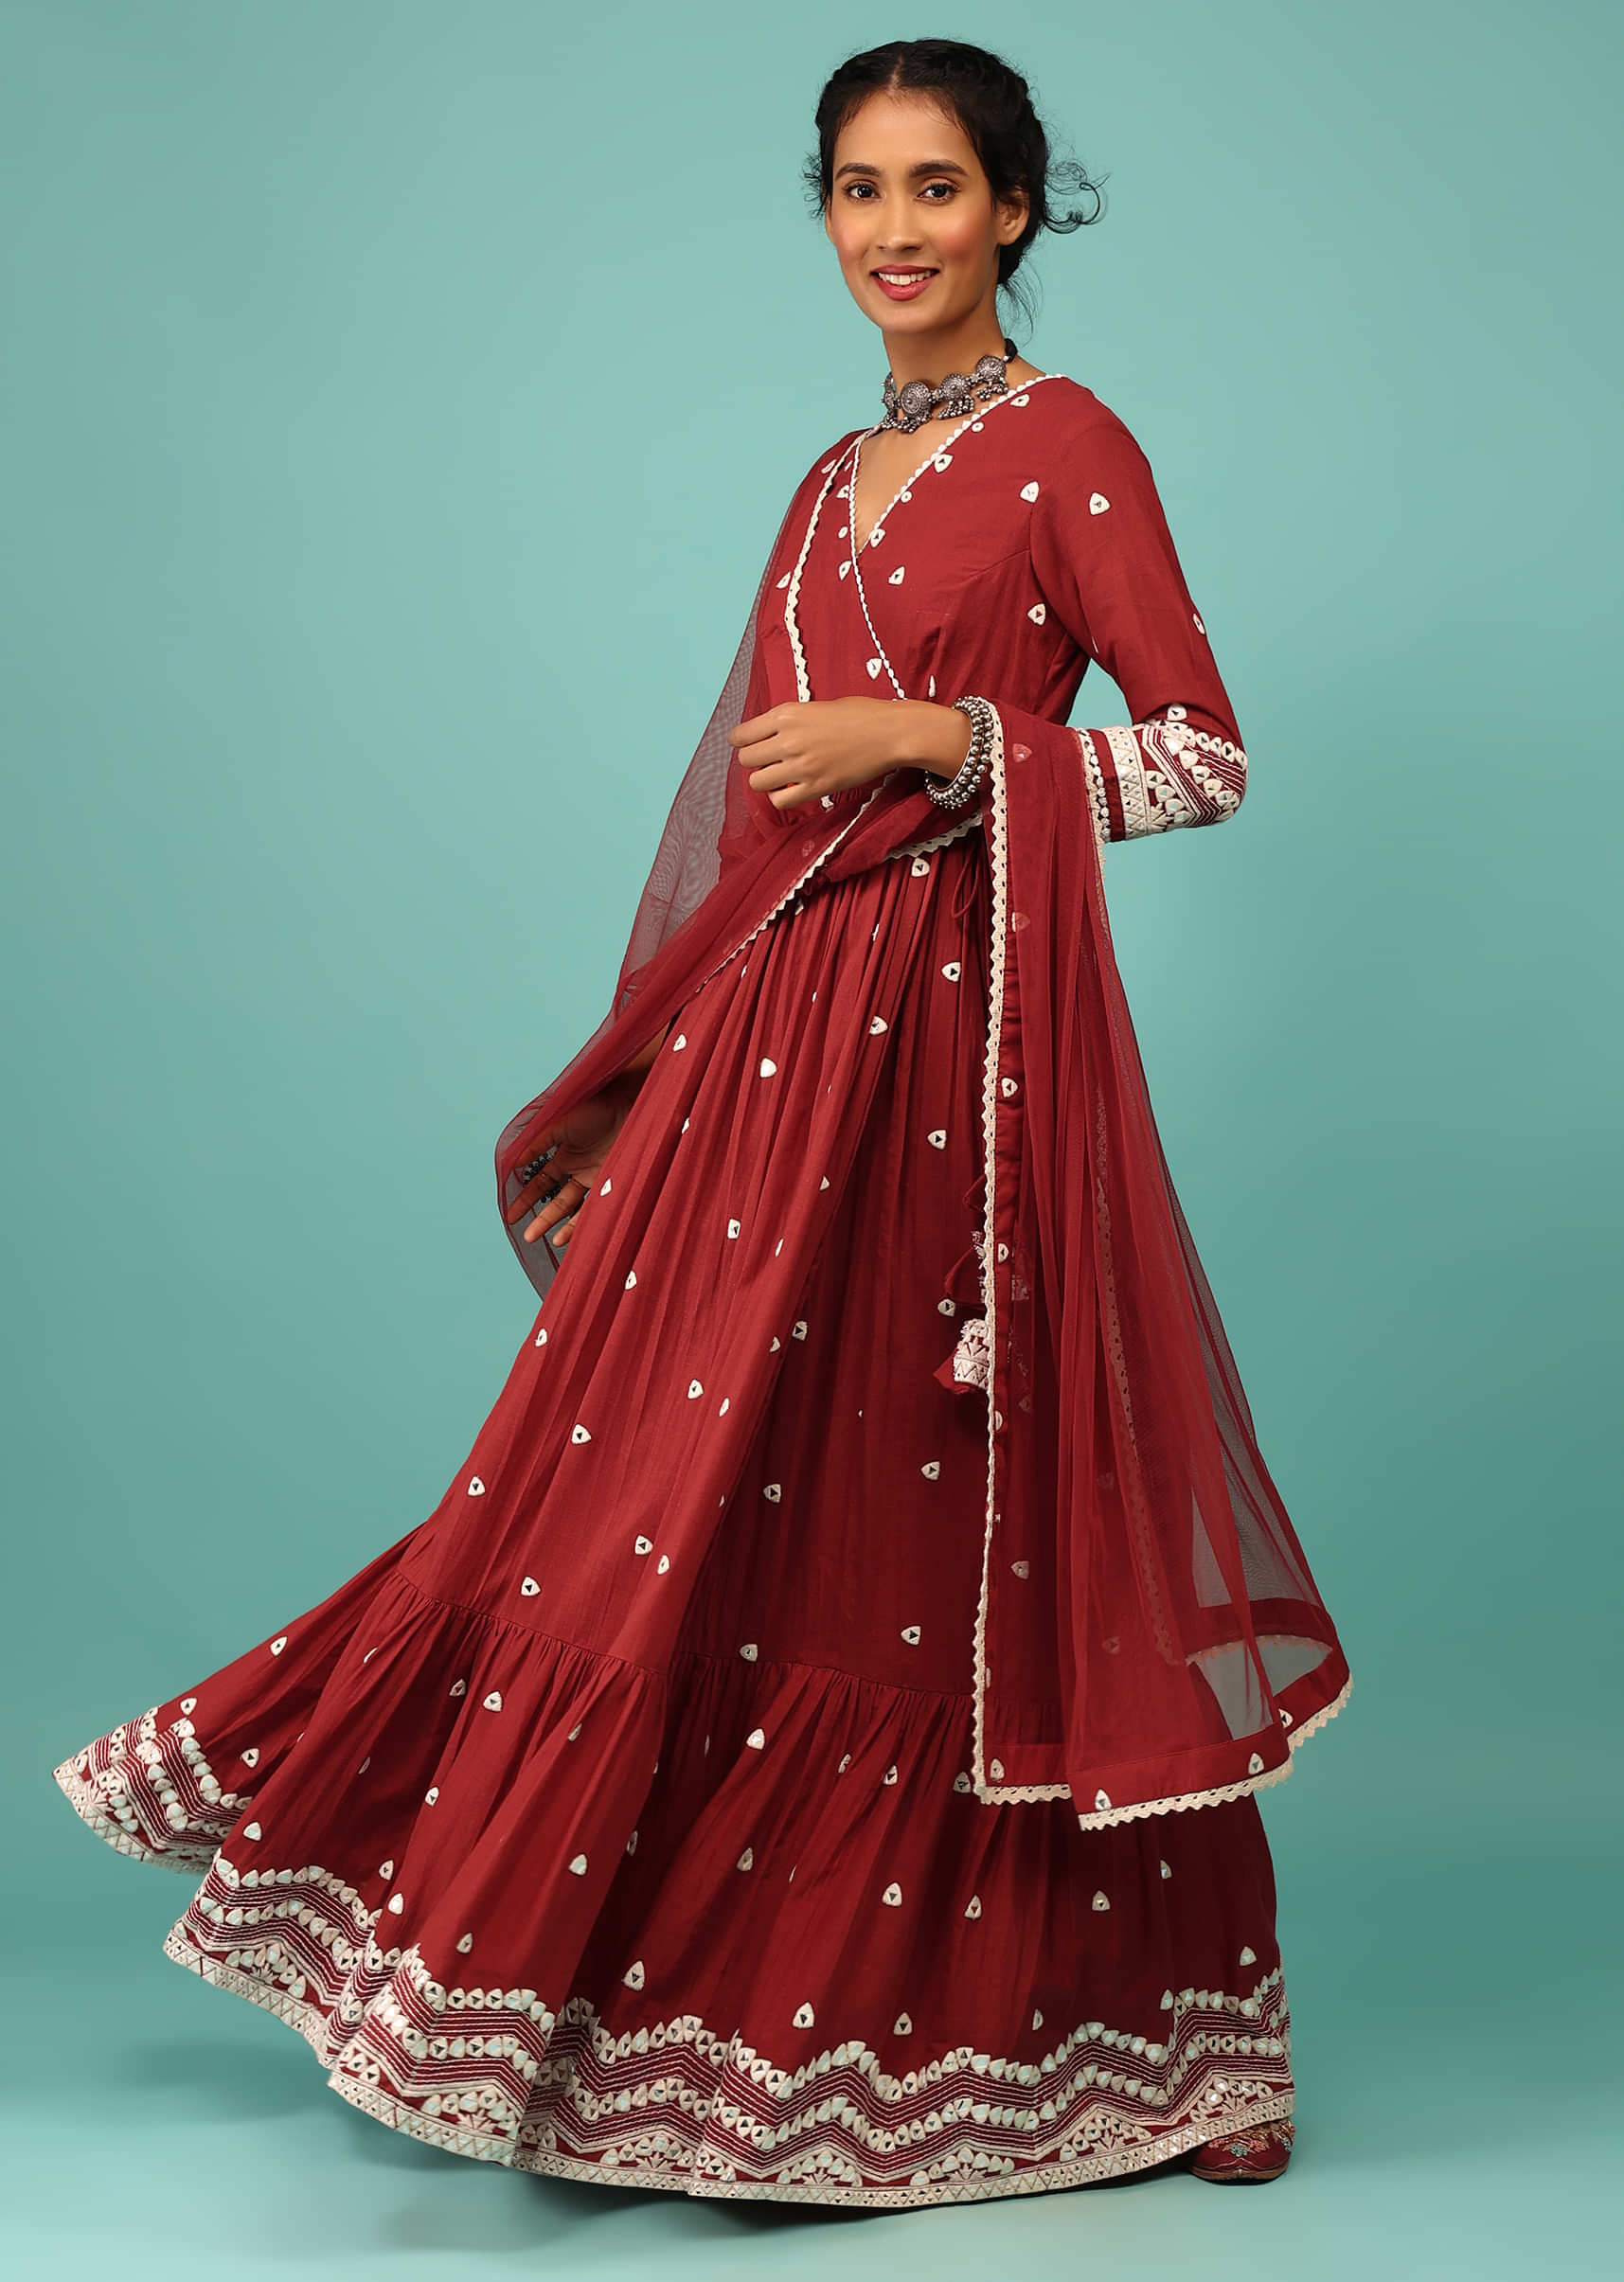 Apple Red Anarkali Kurta In Lucknowi Geometric Embroidery With Angrakha Pattern & Bottom Frill